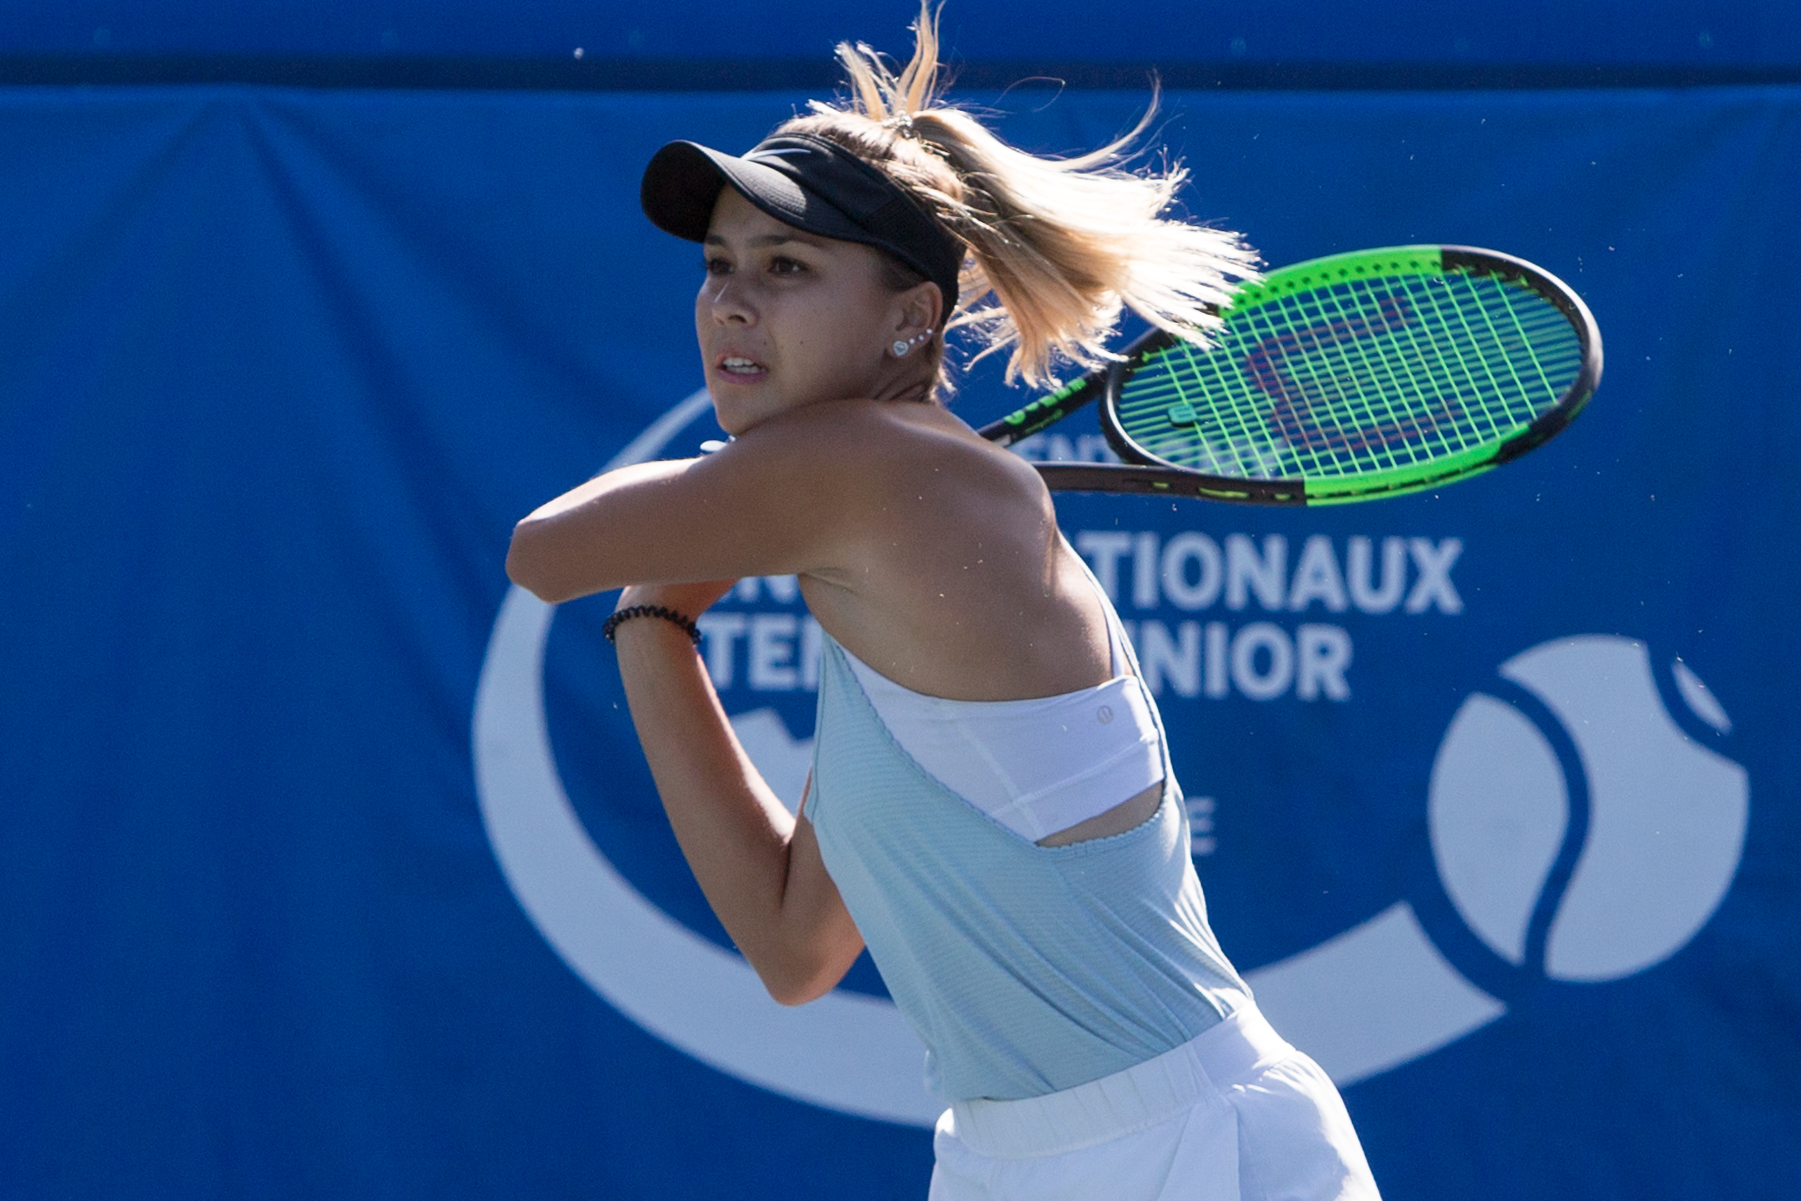 Bui and Arseneault cause upsets in Repentigny